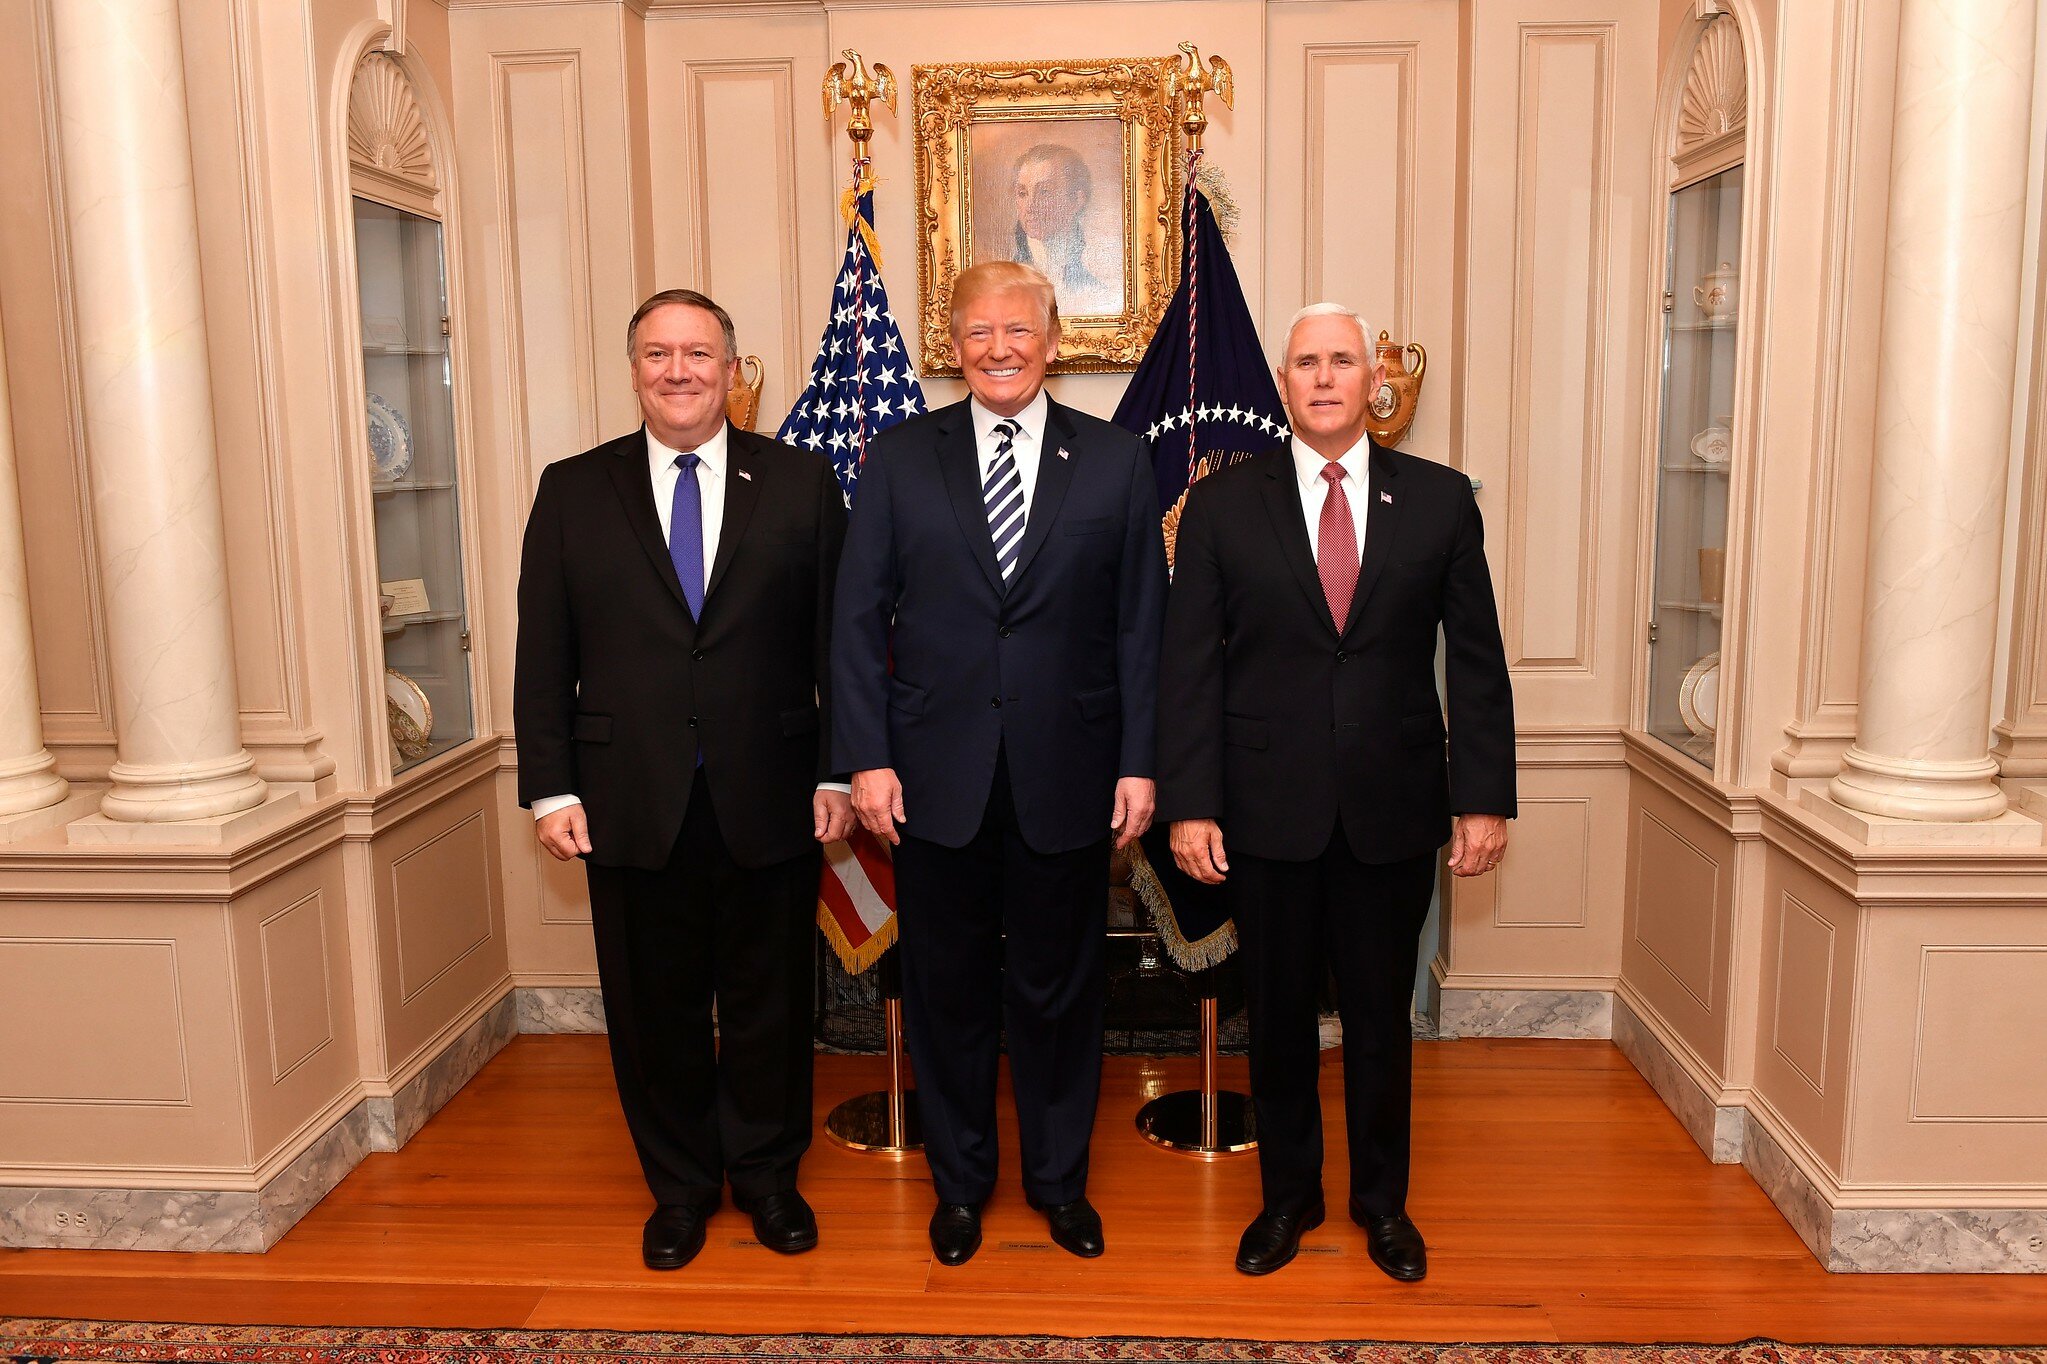 Secretary Pompeo Poses for a Photo With President Trump and Vice President Pence